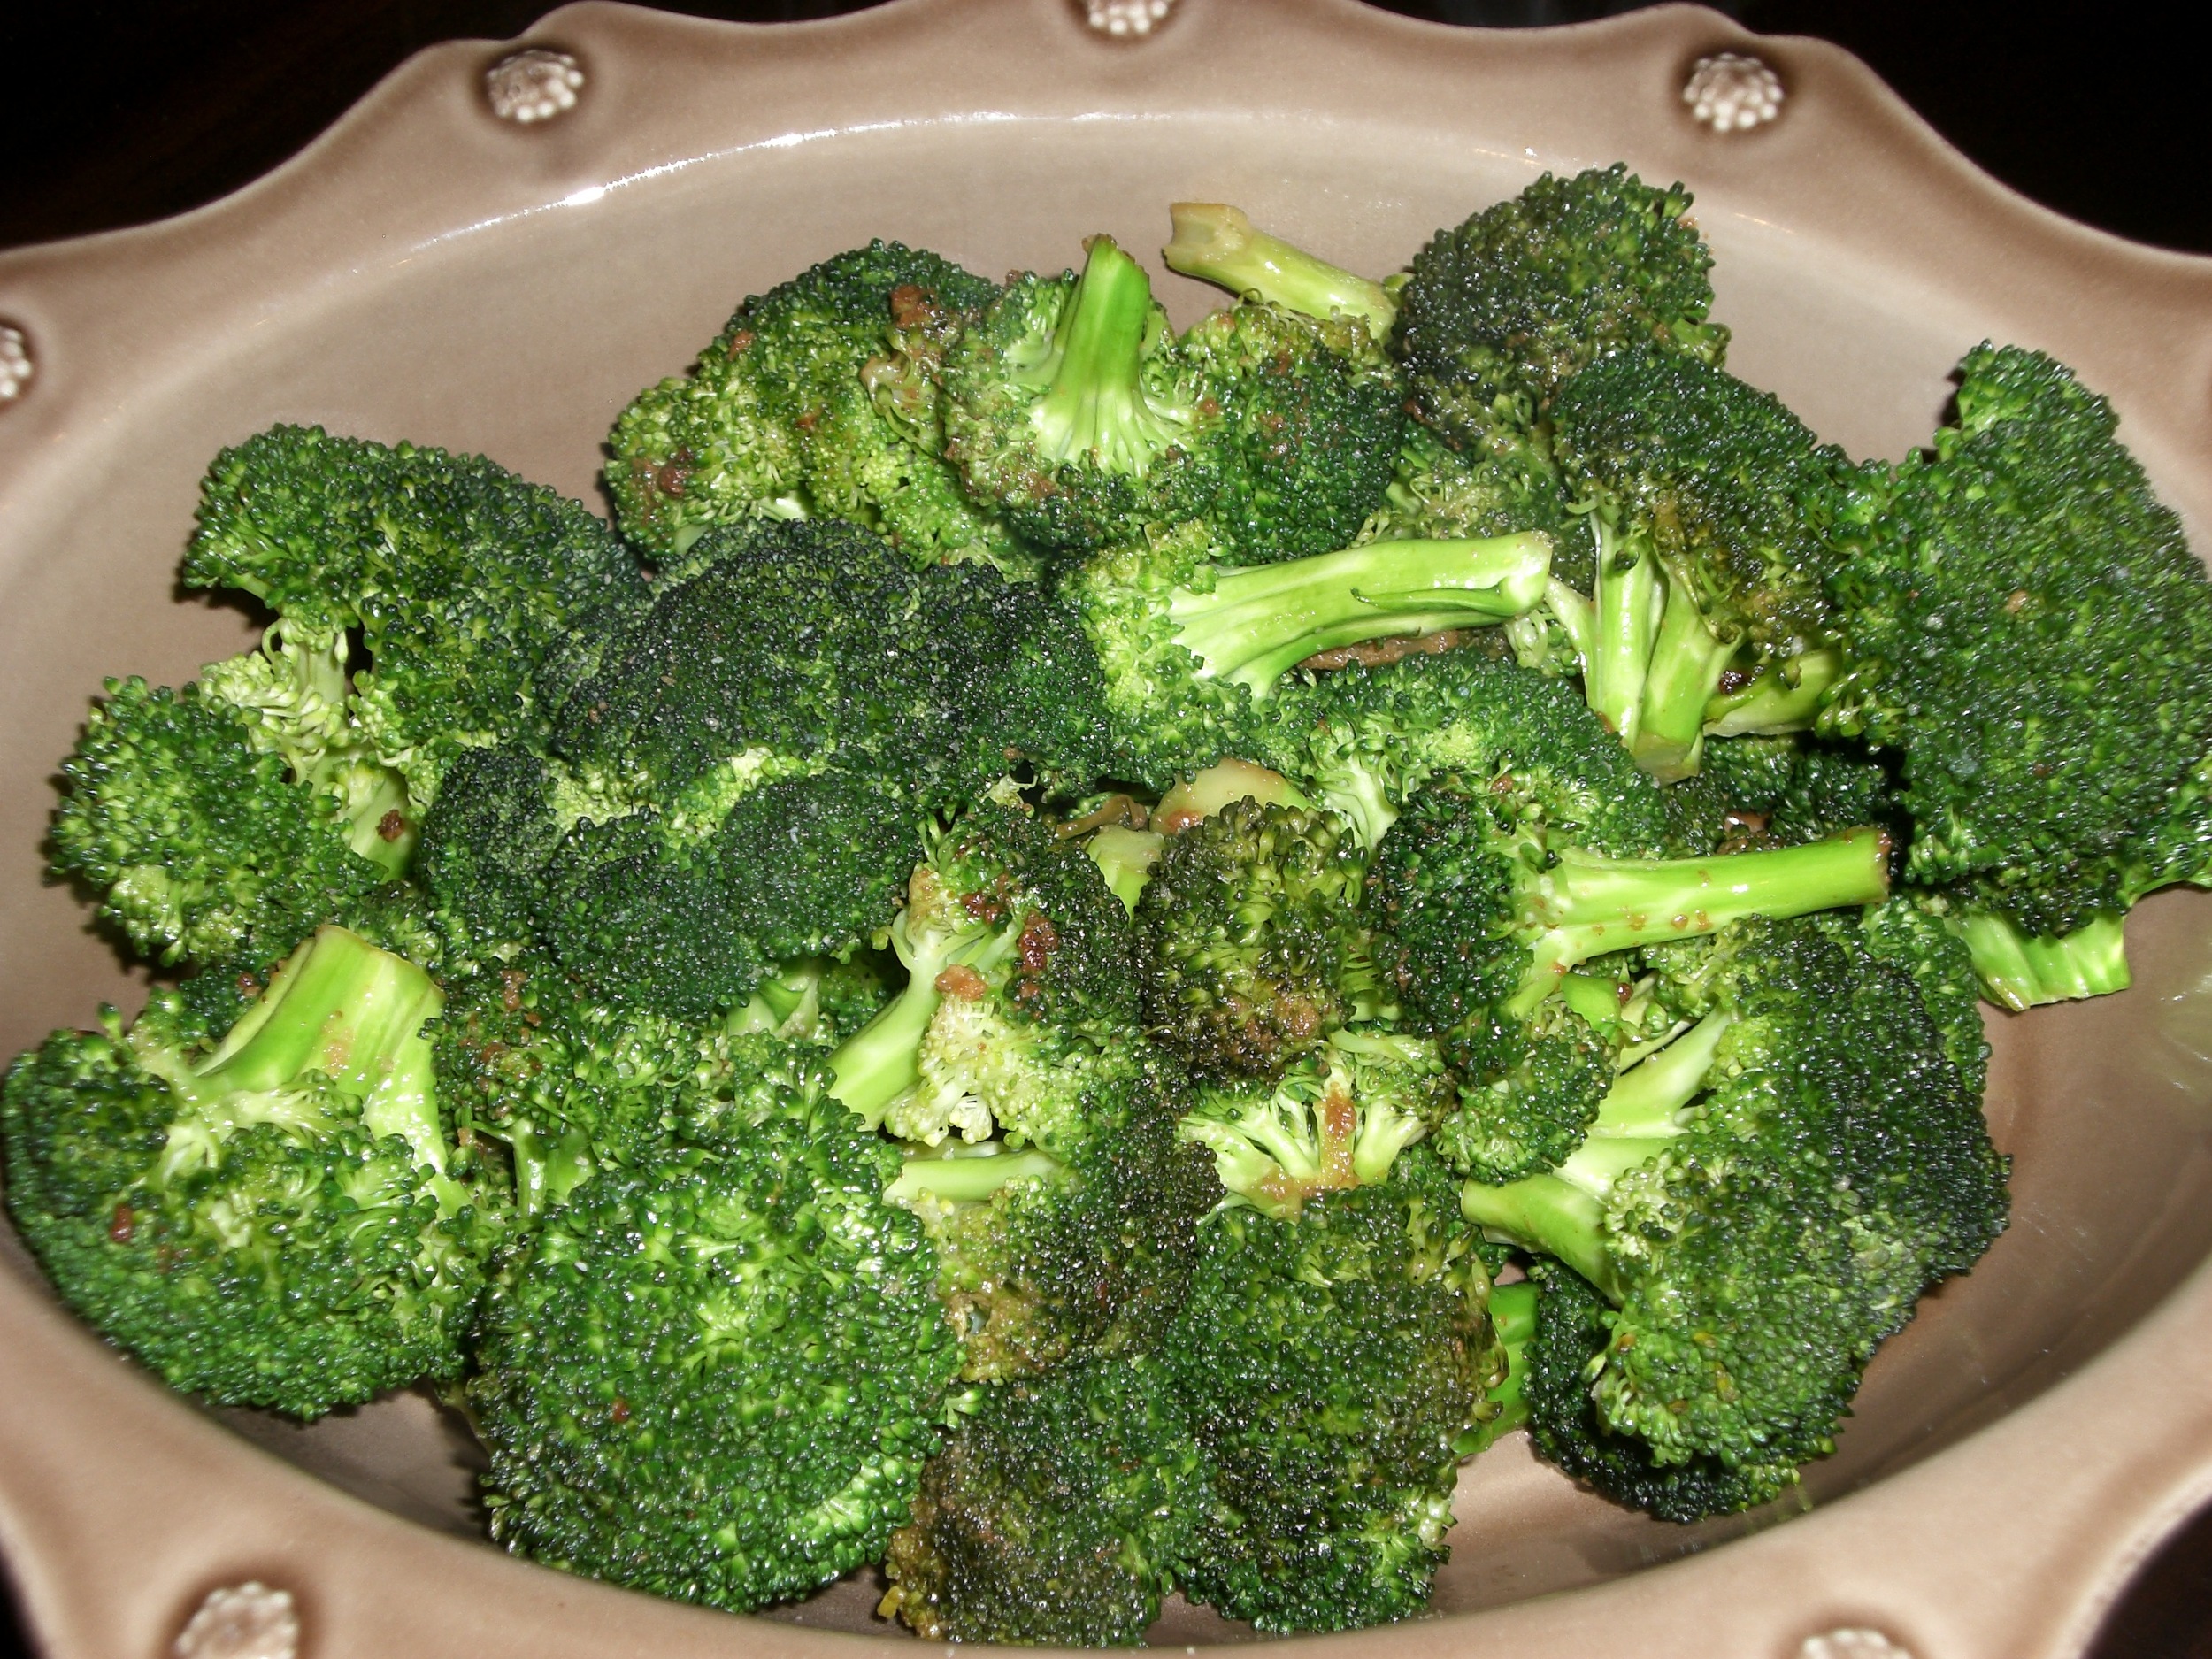 Broccoli is totally vegan and wildly heathy!